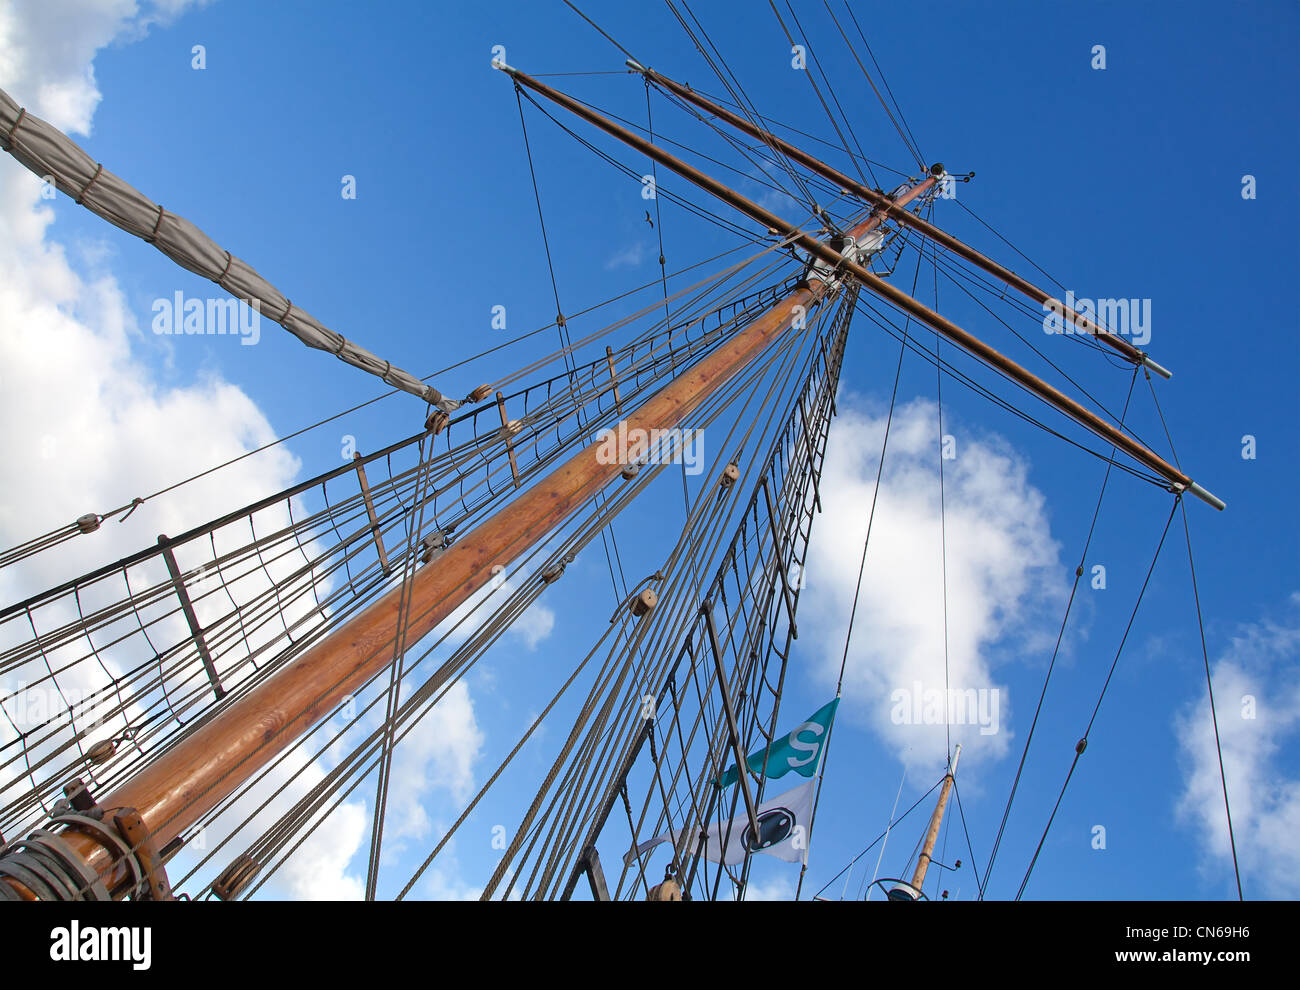 Upwards view of the old ship's masts Stock Photo